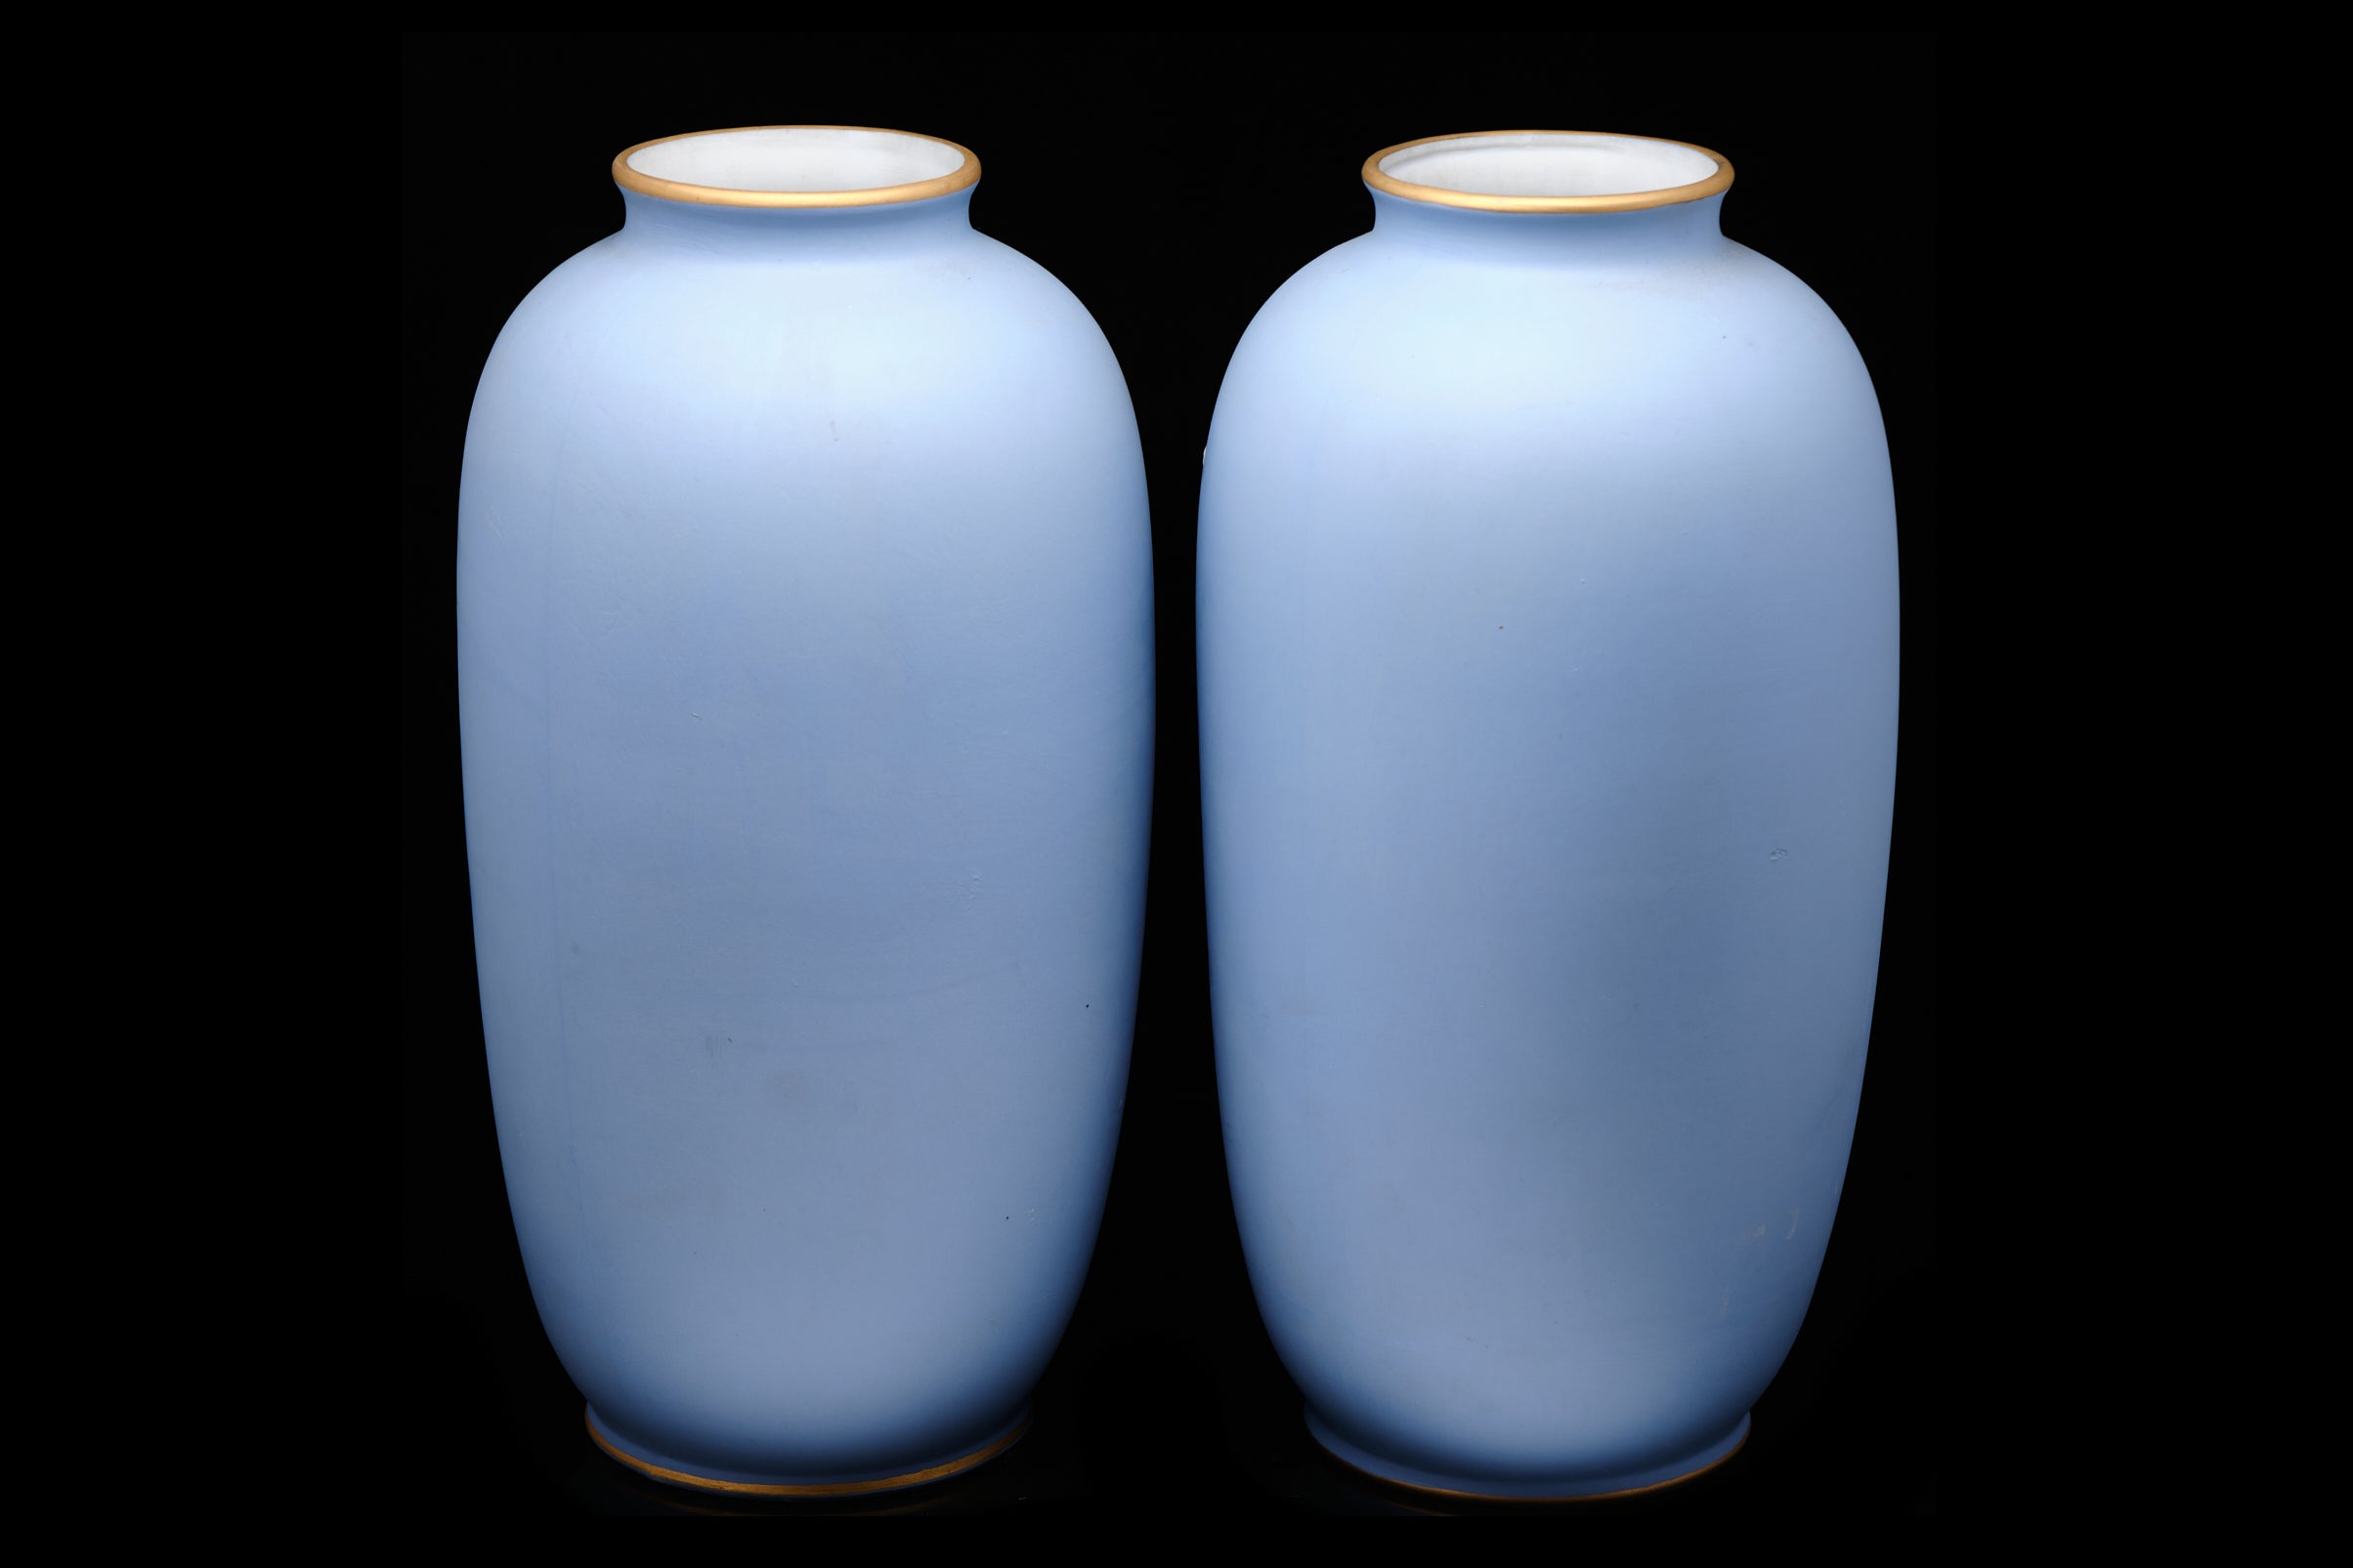 Pair of two faced jugs